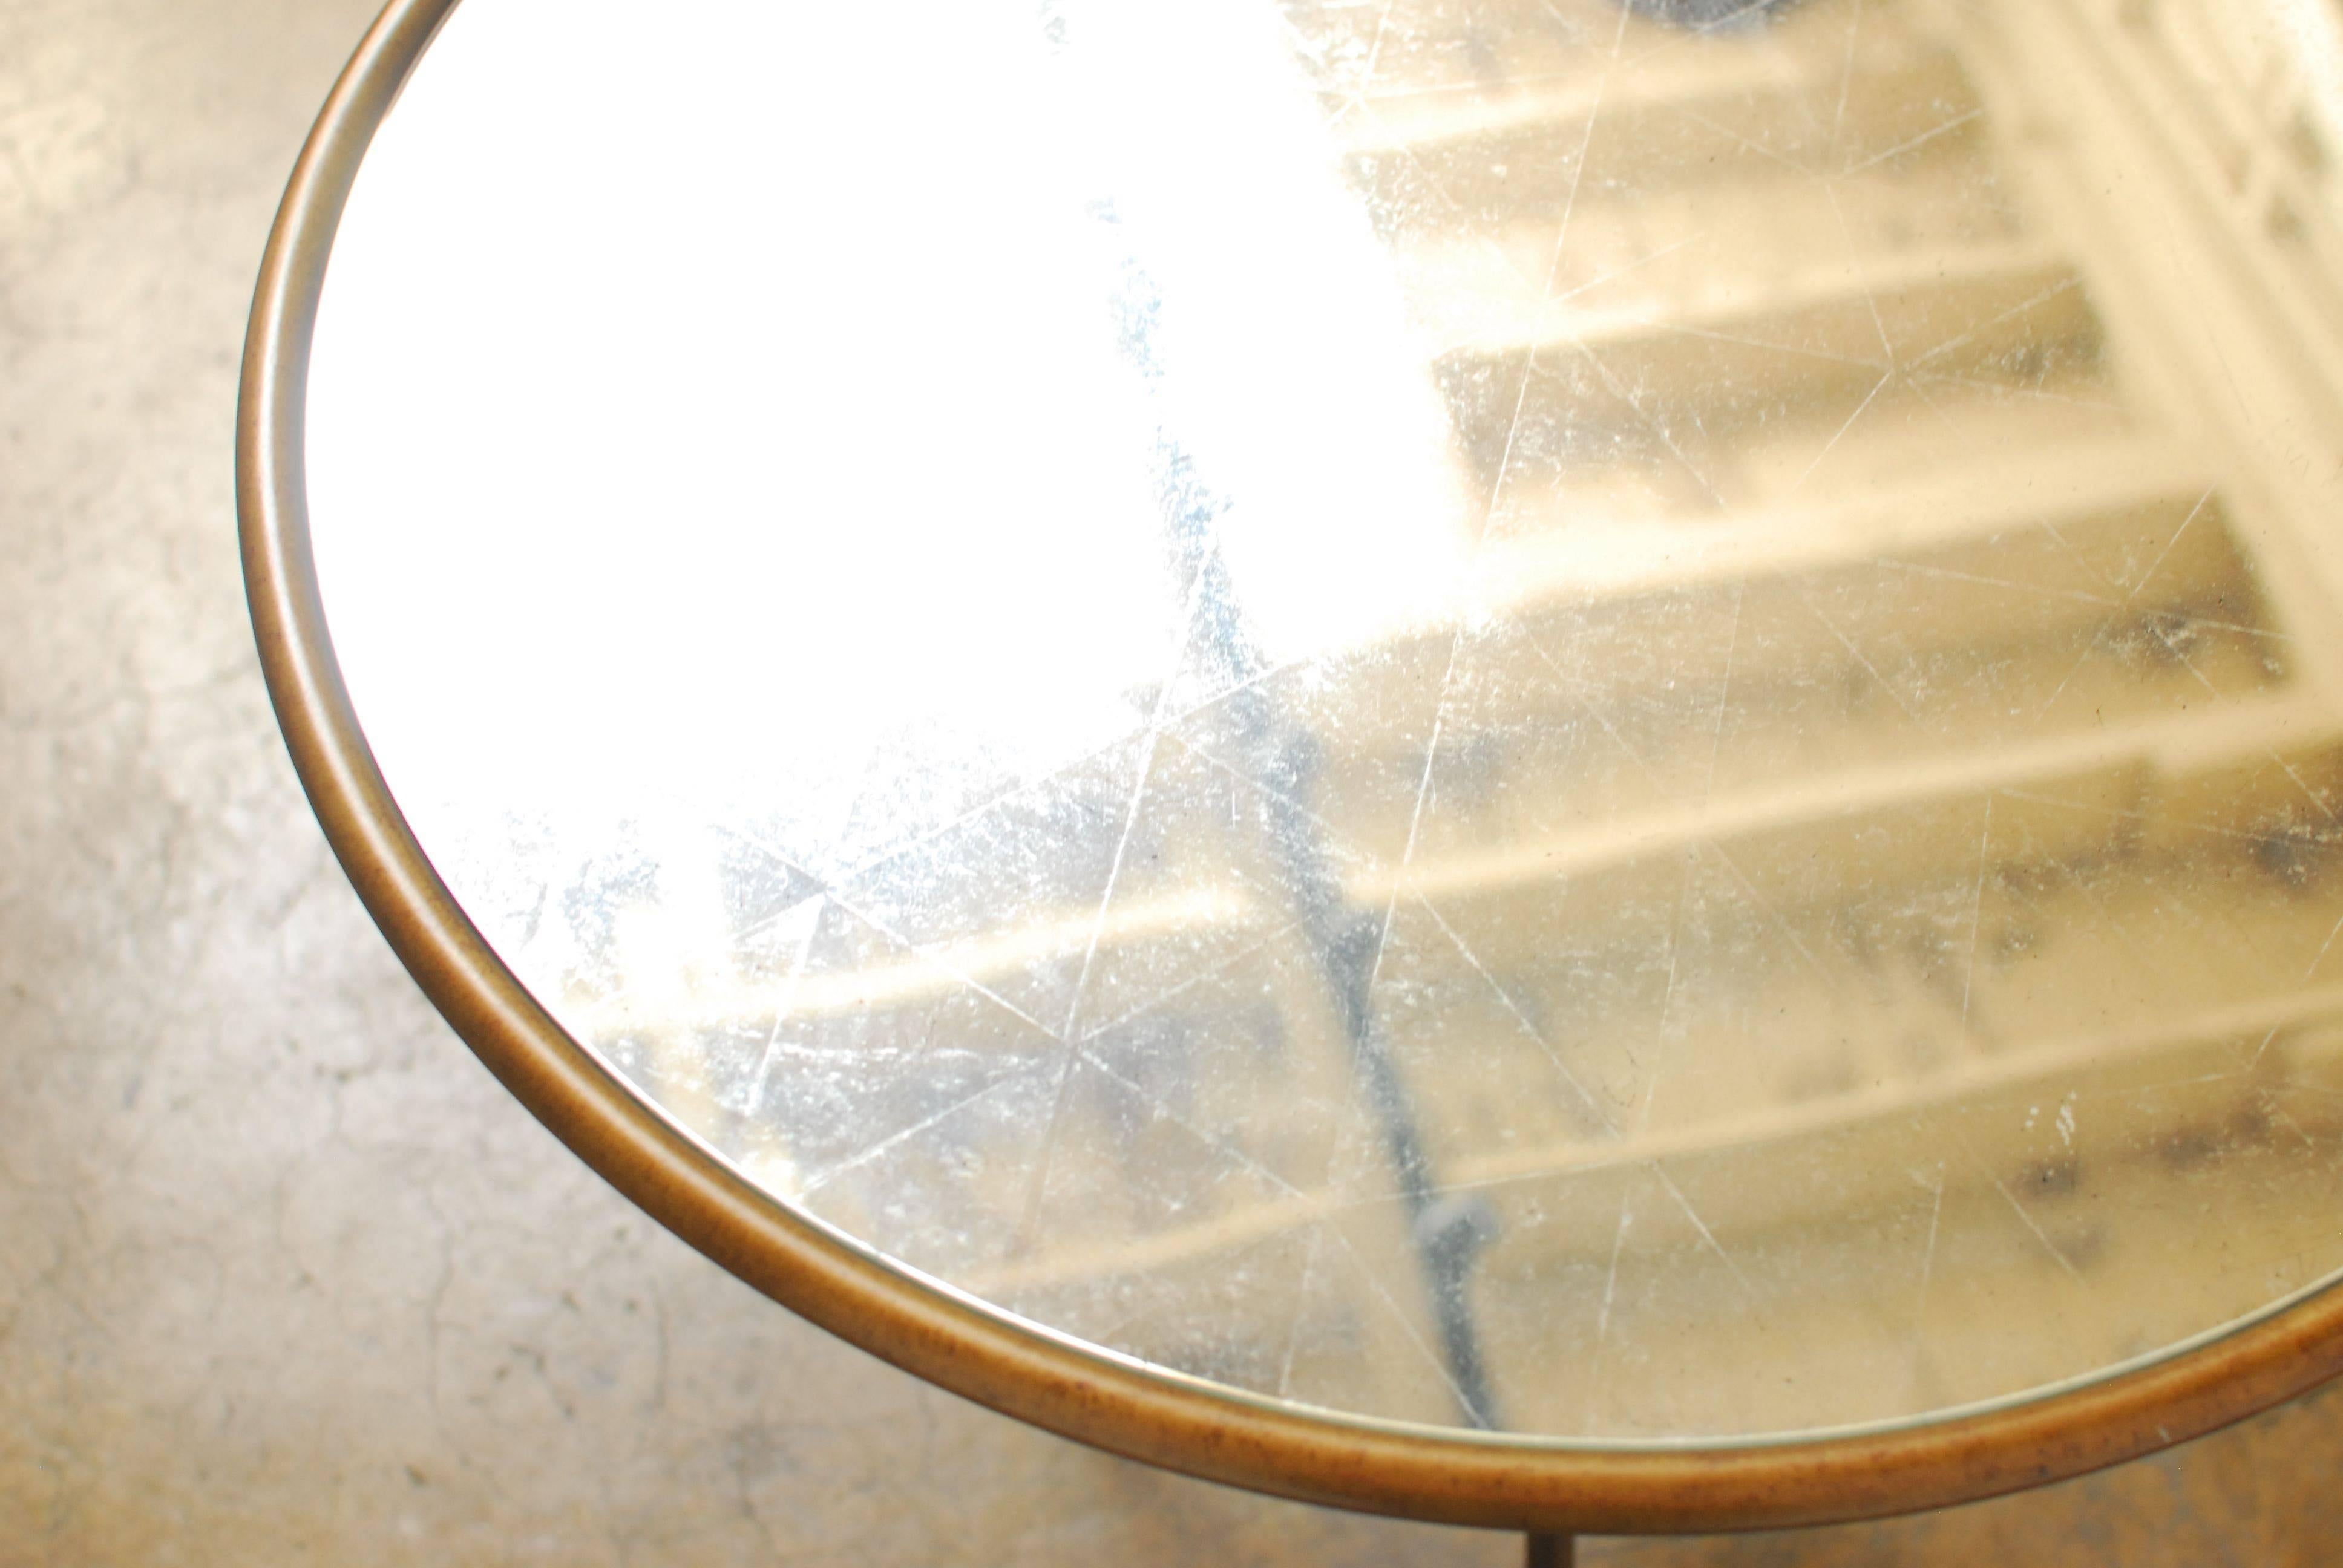 Round gilded iron occasional side table made in the manner of Rene´ Drouet with an iron rope knot base and finished in a gilt metal. The top features an antiqued round mirror top inlay with a geometric pattern etched into the glass. The mirror has a